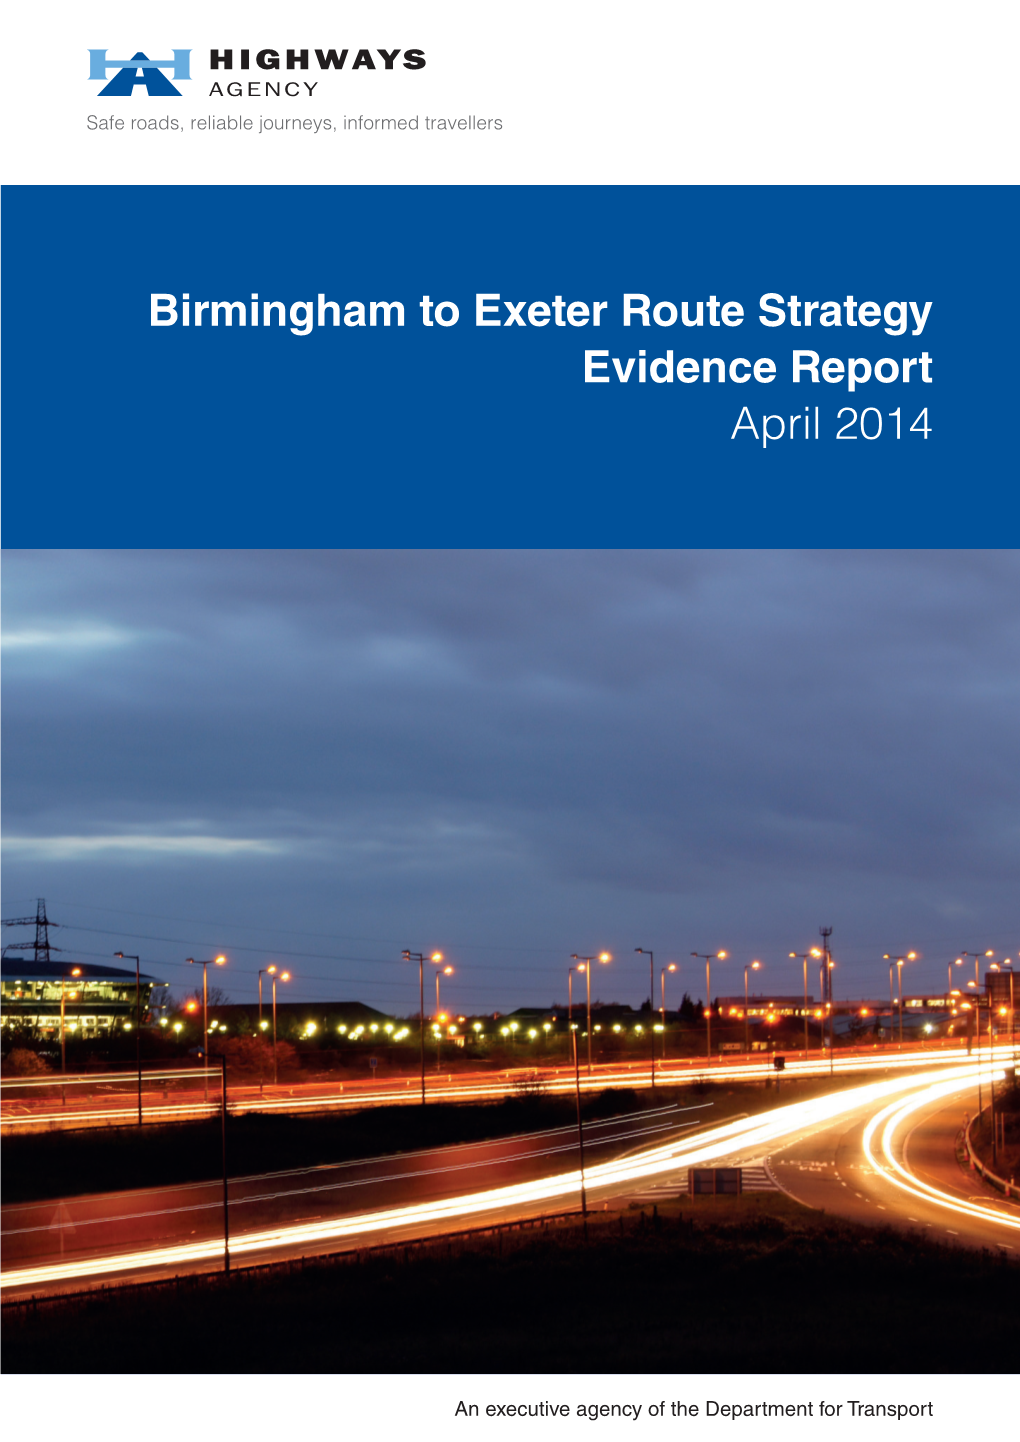 Birmingham to Exeter Route Strategy Evidence Report April 2014